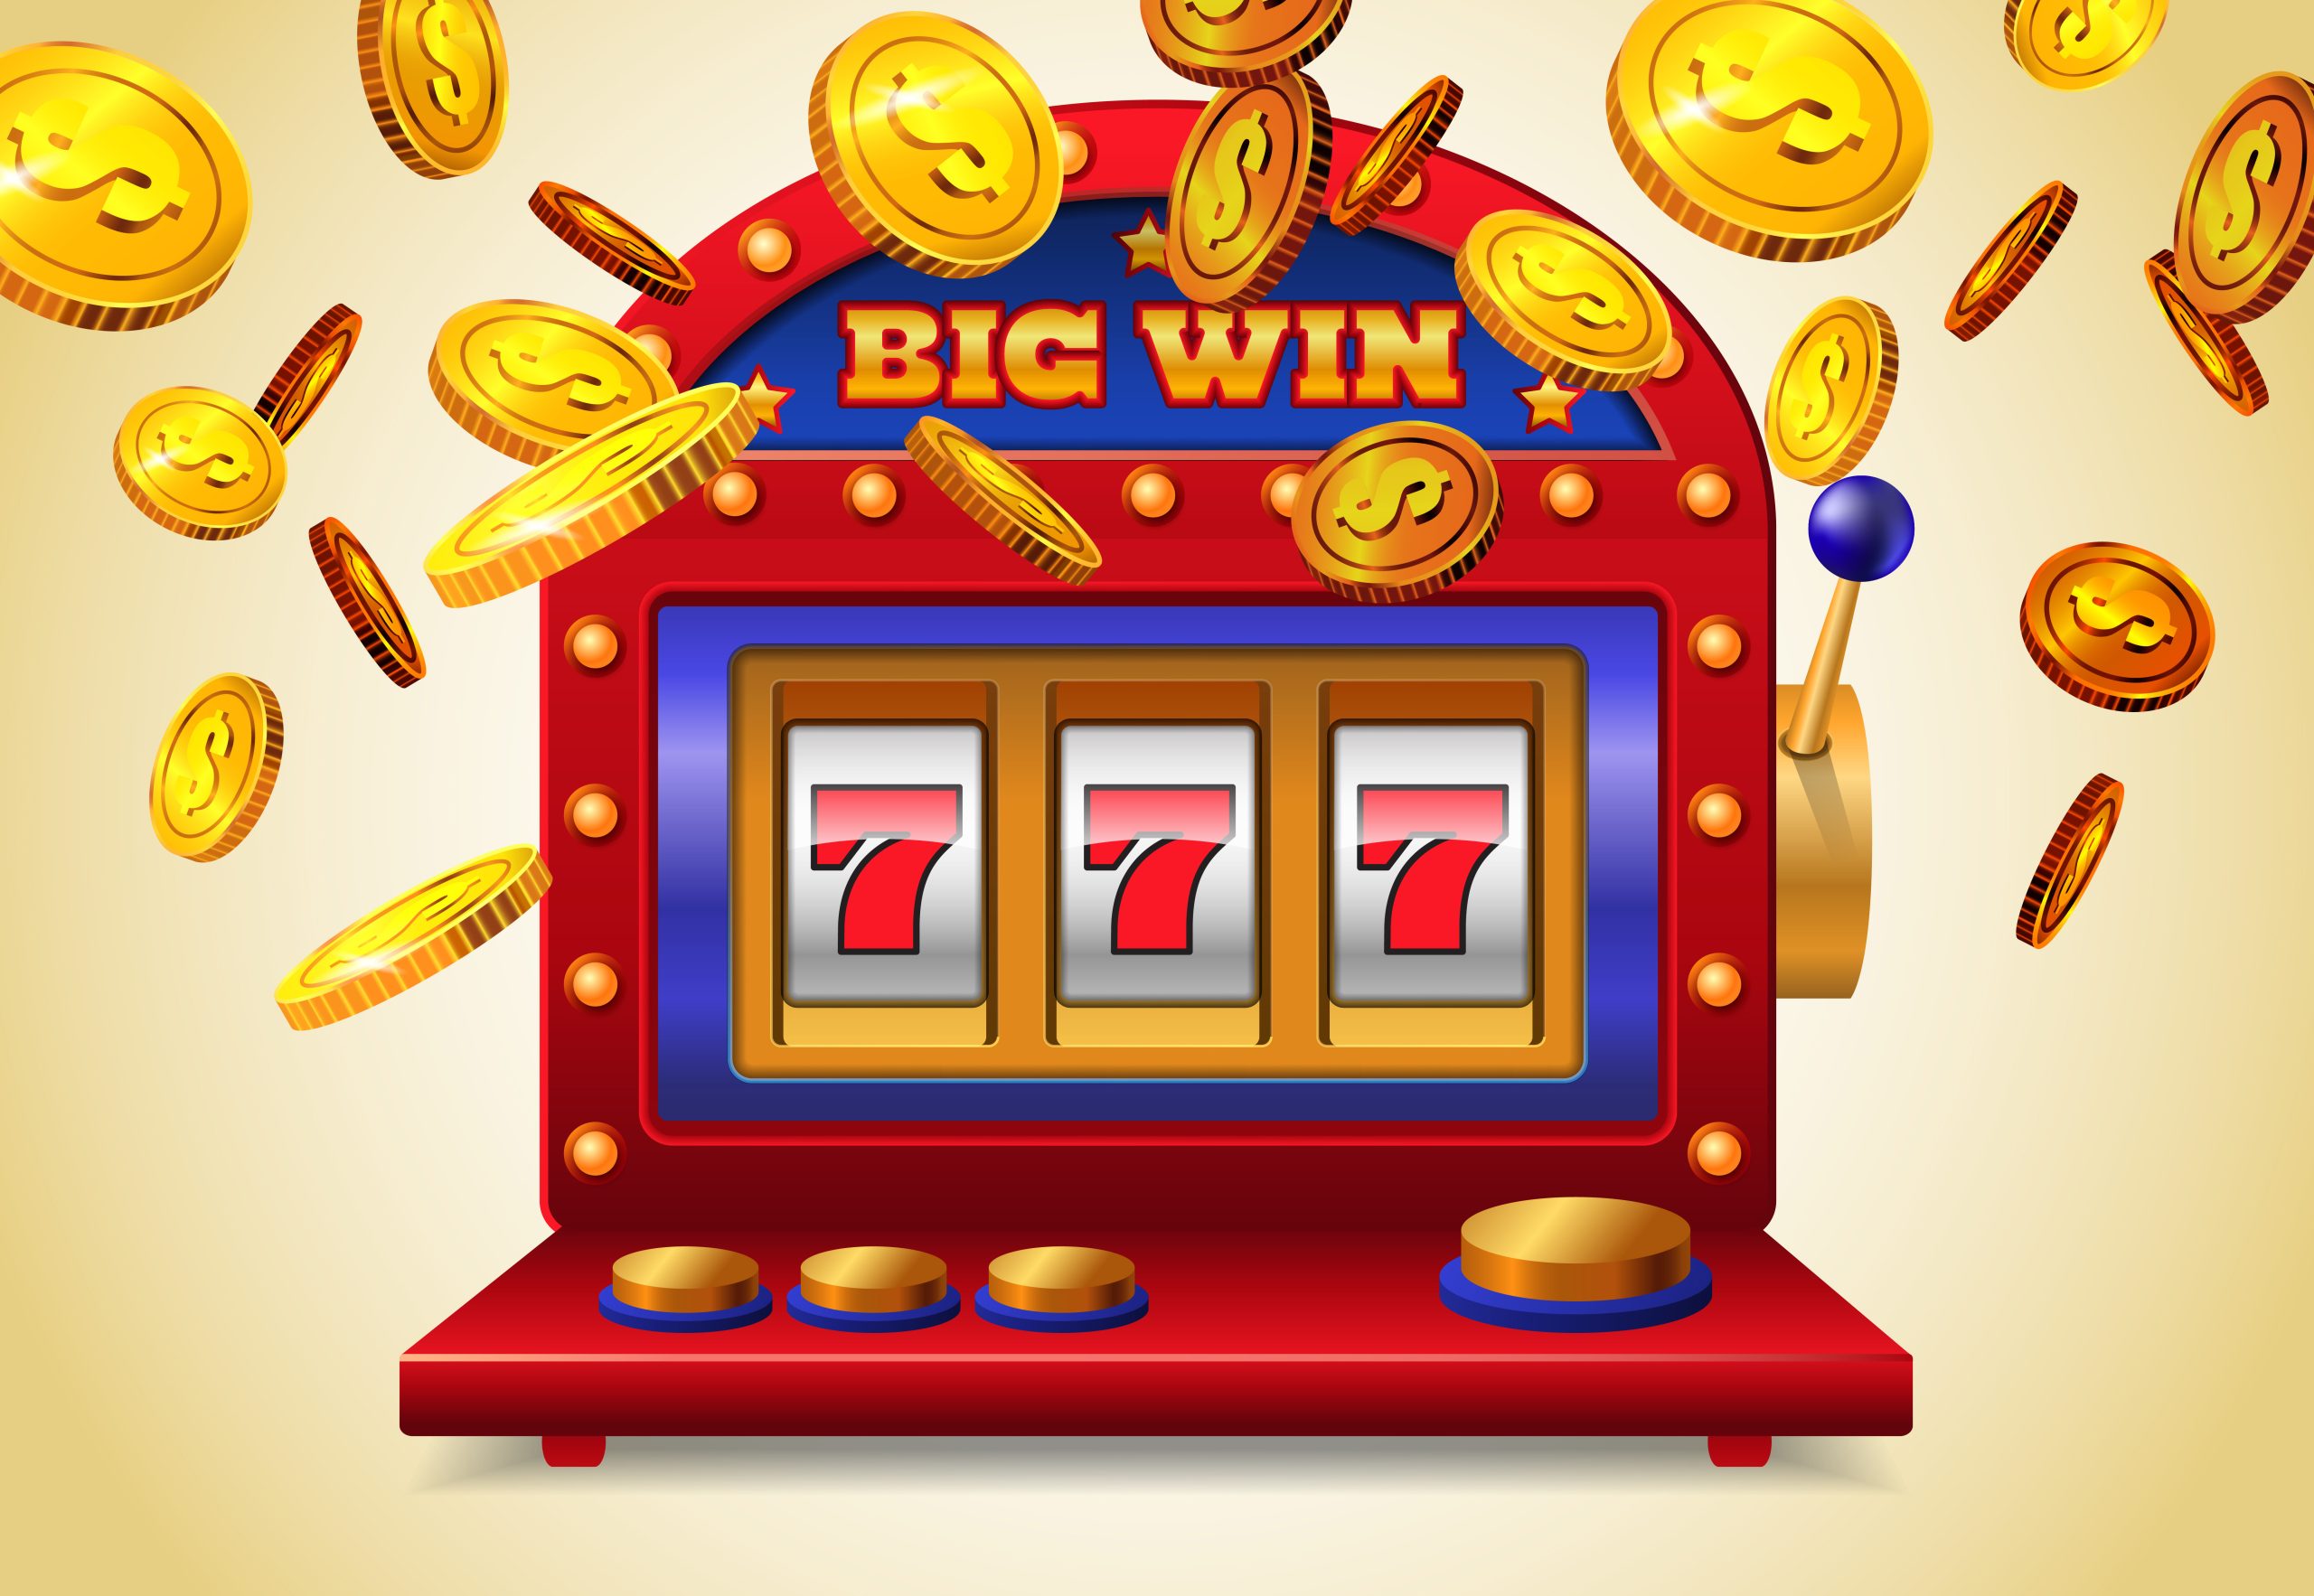 If you are Looking for High Bonuses at Sunrise Slots Casino, You Have Come to the Right Place!